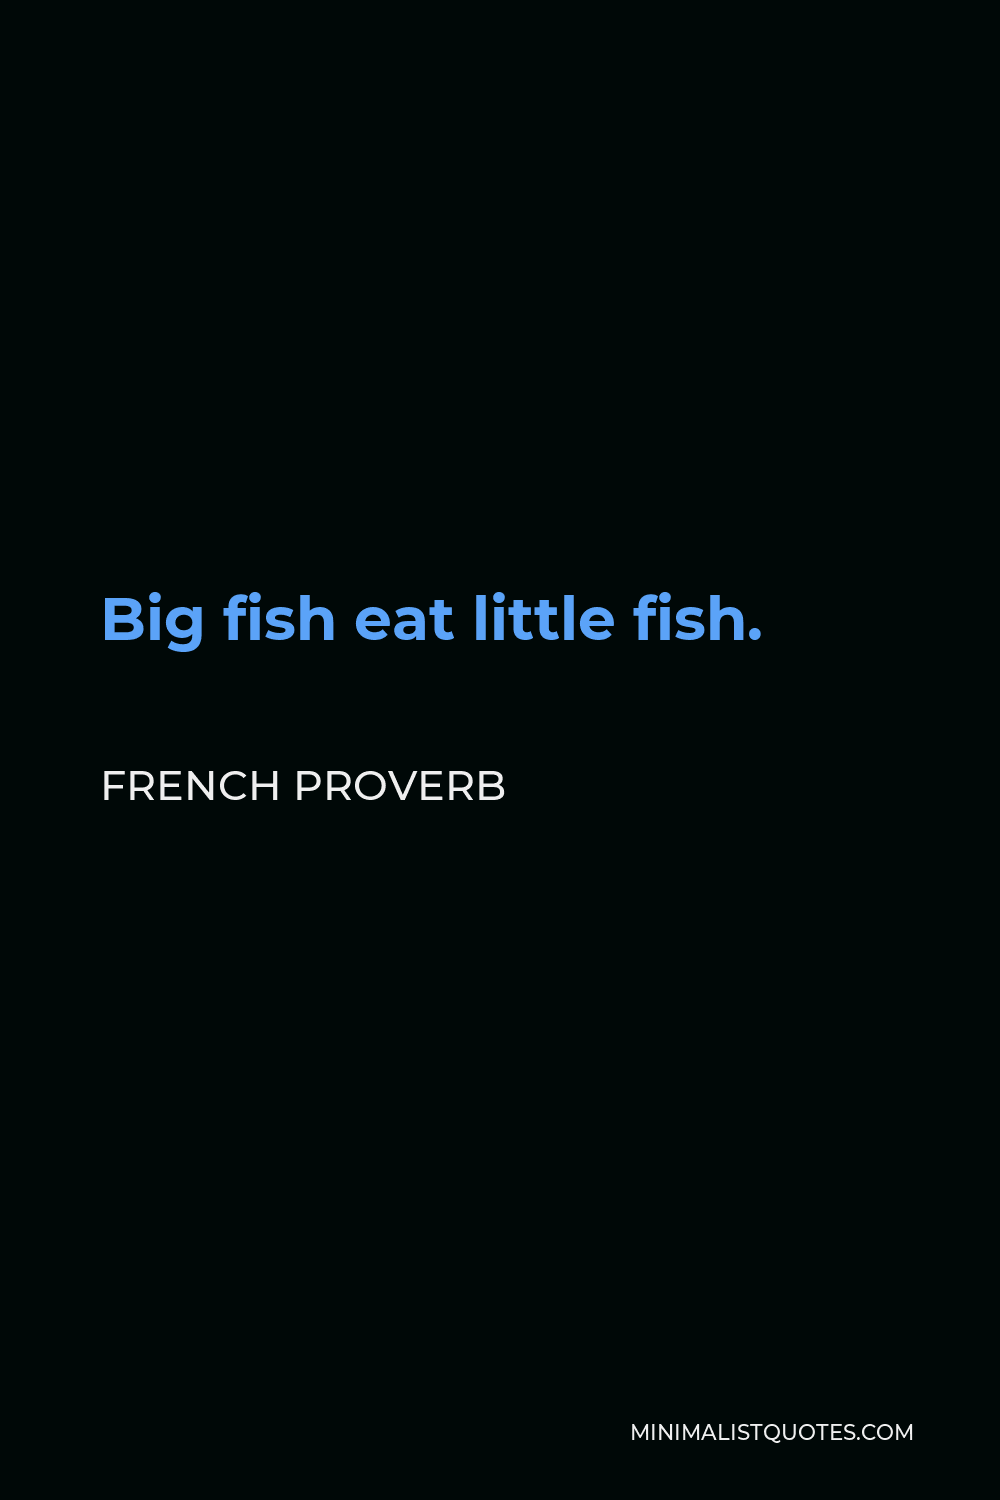 French Proverb Quote - Big fish eat little fish.